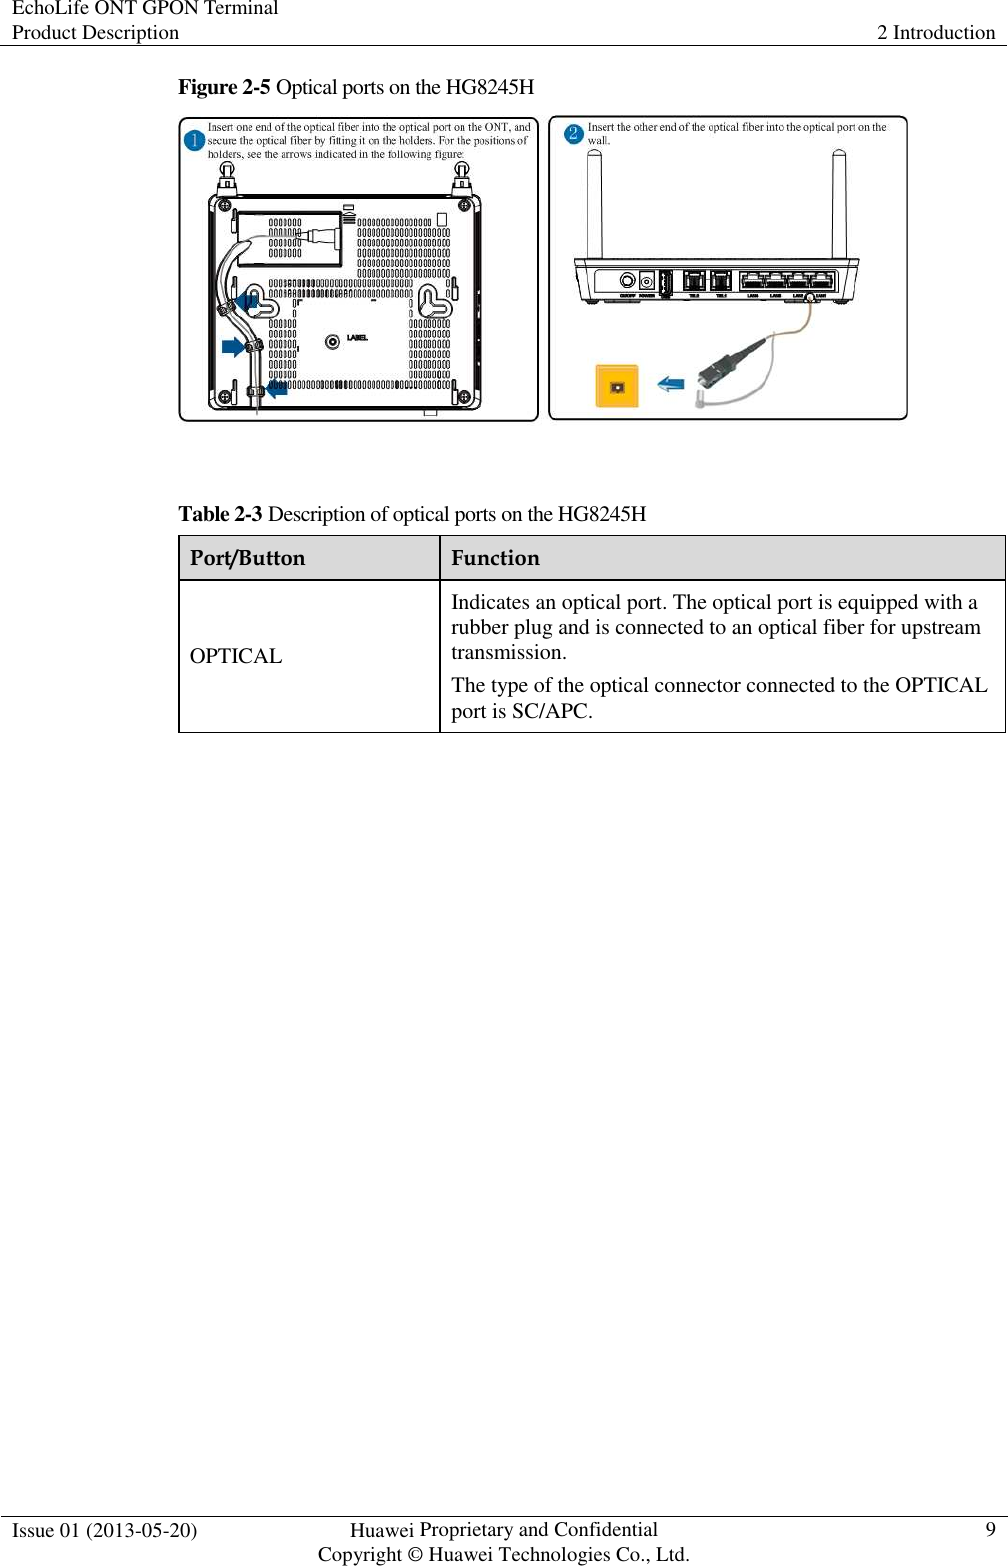 EchoLife ONT GPON Terminal Product Description  2 Introduction  Issue 01 (2013-05-20)  Huawei Proprietary and Confidential                                     Copyright © Huawei Technologies Co., Ltd. 9  Figure 2-5 Optical ports on the HG8245H   Table 2-3 Description of optical ports on the HG8245H Port/Button  Function OPTICAL Indicates an optical port. The optical port is equipped with a rubber plug and is connected to an optical fiber for upstream transmission. The type of the optical connector connected to the OPTICAL port is SC/APC.  